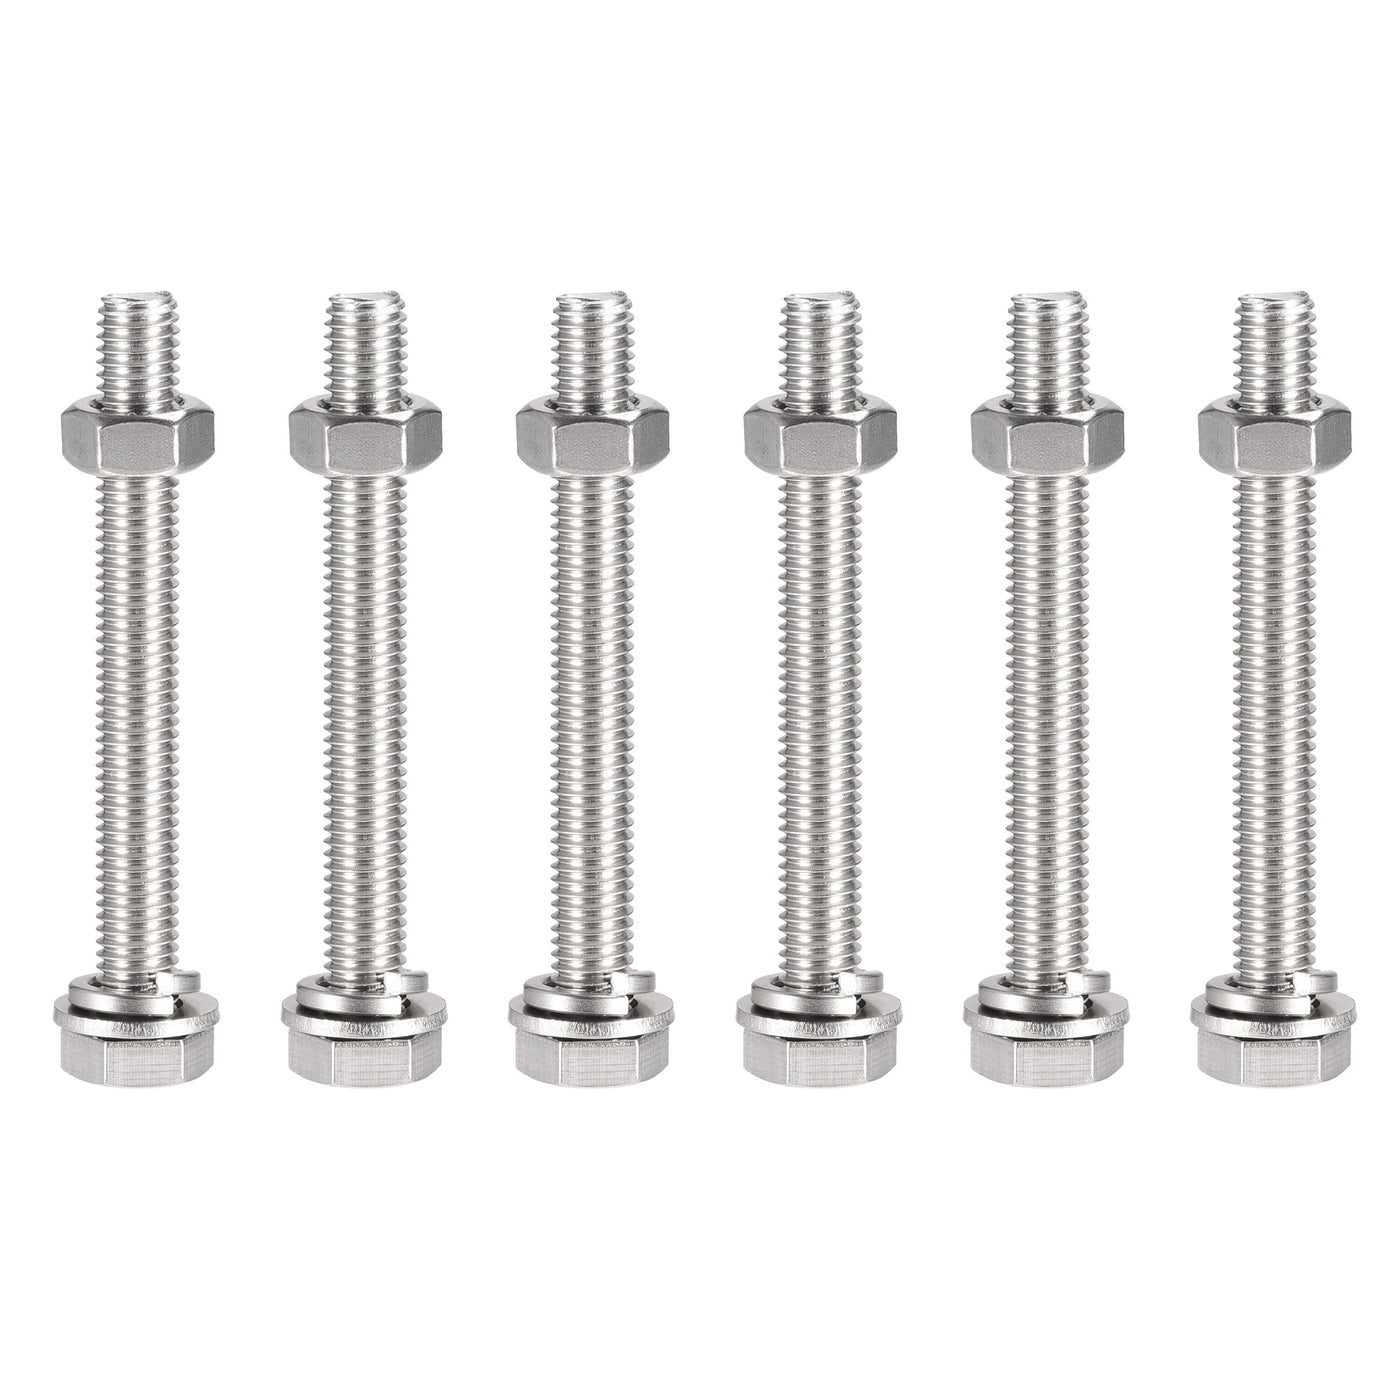 Uxcell Uxcell M10 x 140mm Hex Head Screws Bolts, Nuts, Flat & Lock Washers Kits, 304 Stainless Steel Fully Thread Hexagon Bolts 6 Sets